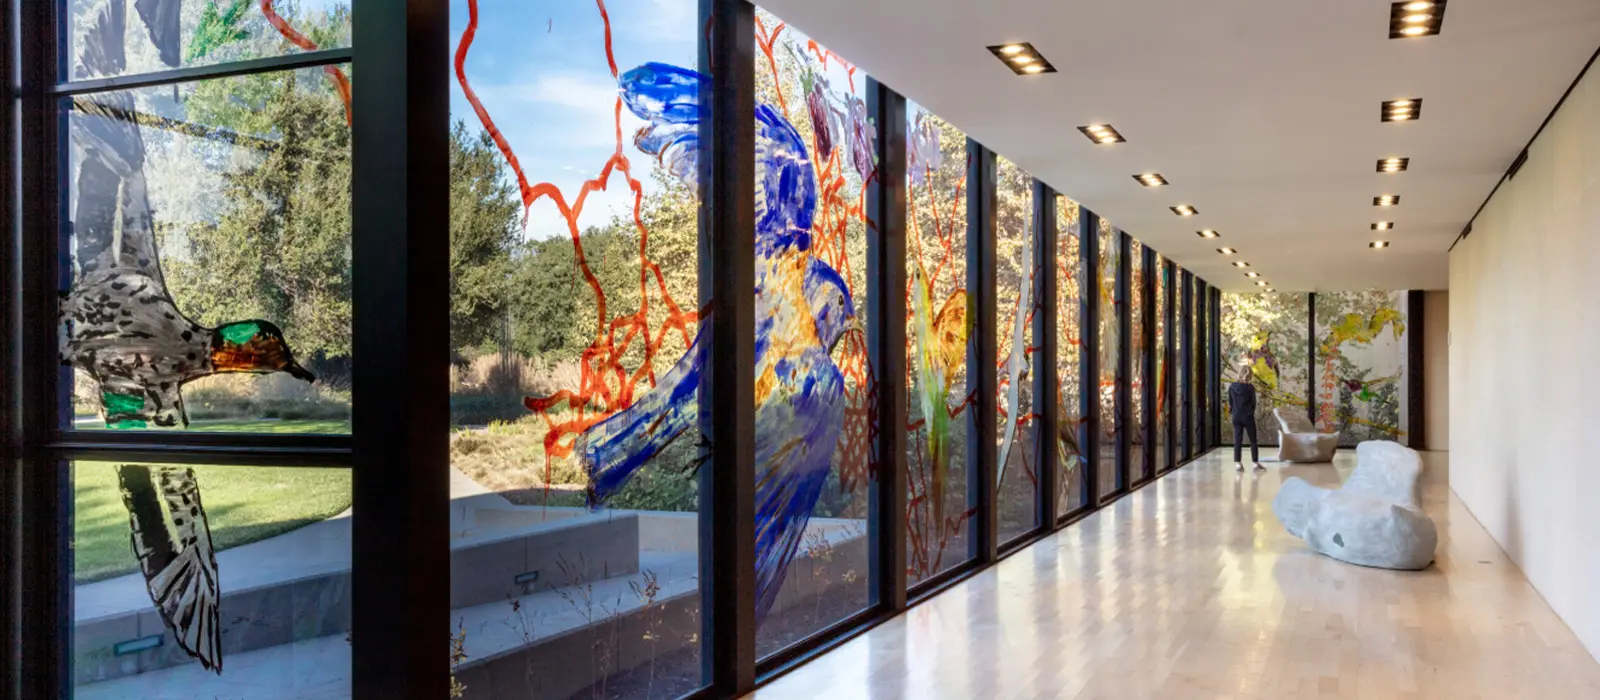 Looking down a glass-walled gallery space with bird painted on windows.